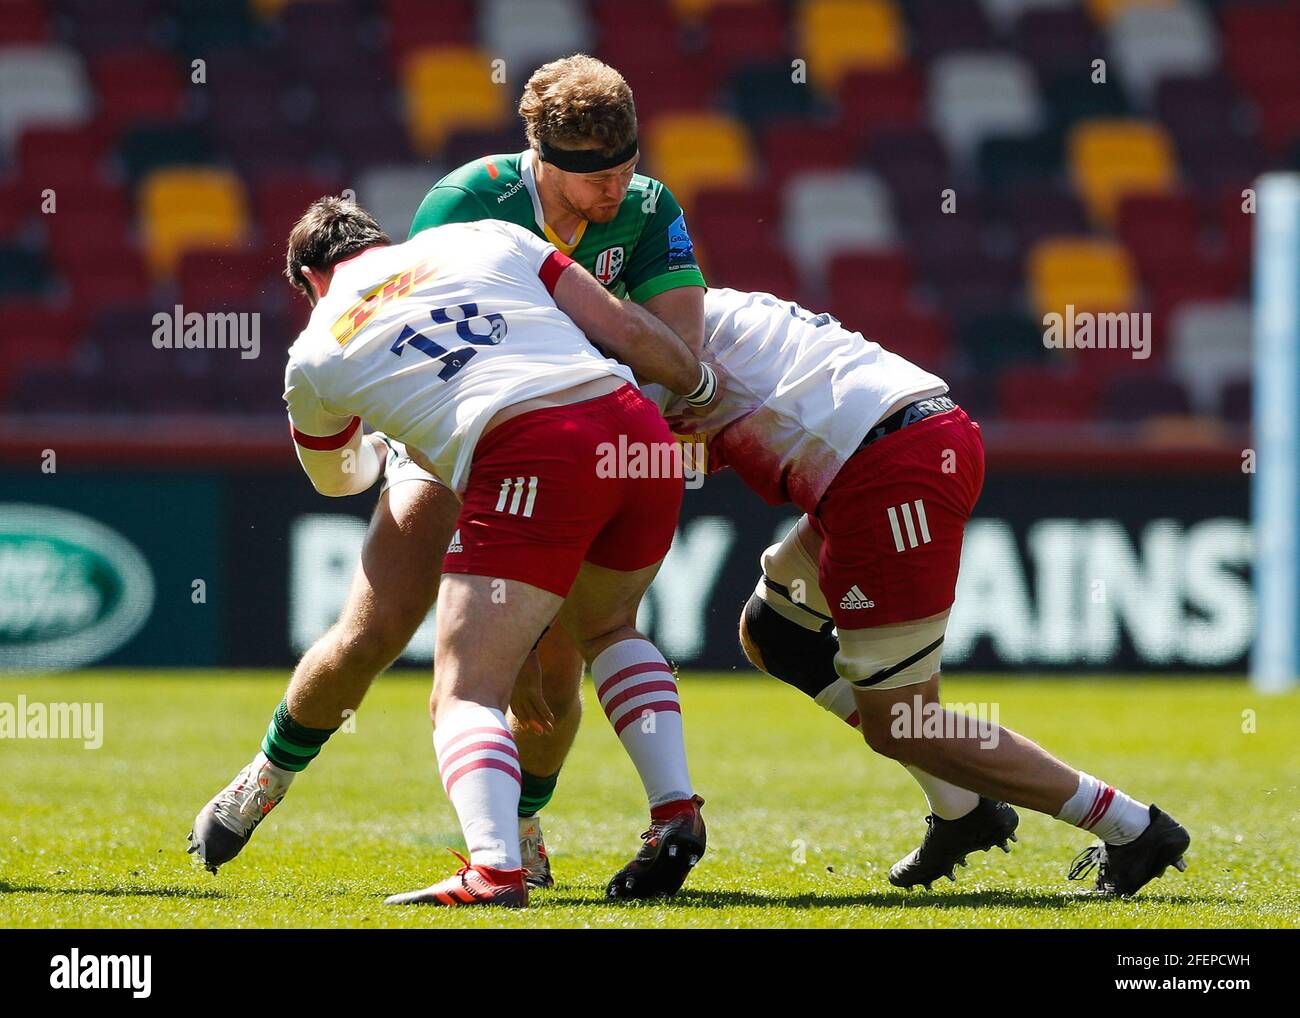 Brentford Community Stadium, London, UK. 24th Apr, 2021. Gallagher Premiership Rugby, London Irish versus Harlequins; Harry Elrington of London Irish tackled by Will Collier and Joe Marchant of Harlequins Credit: Action Plus Sports/Alamy Live News Stock Photo